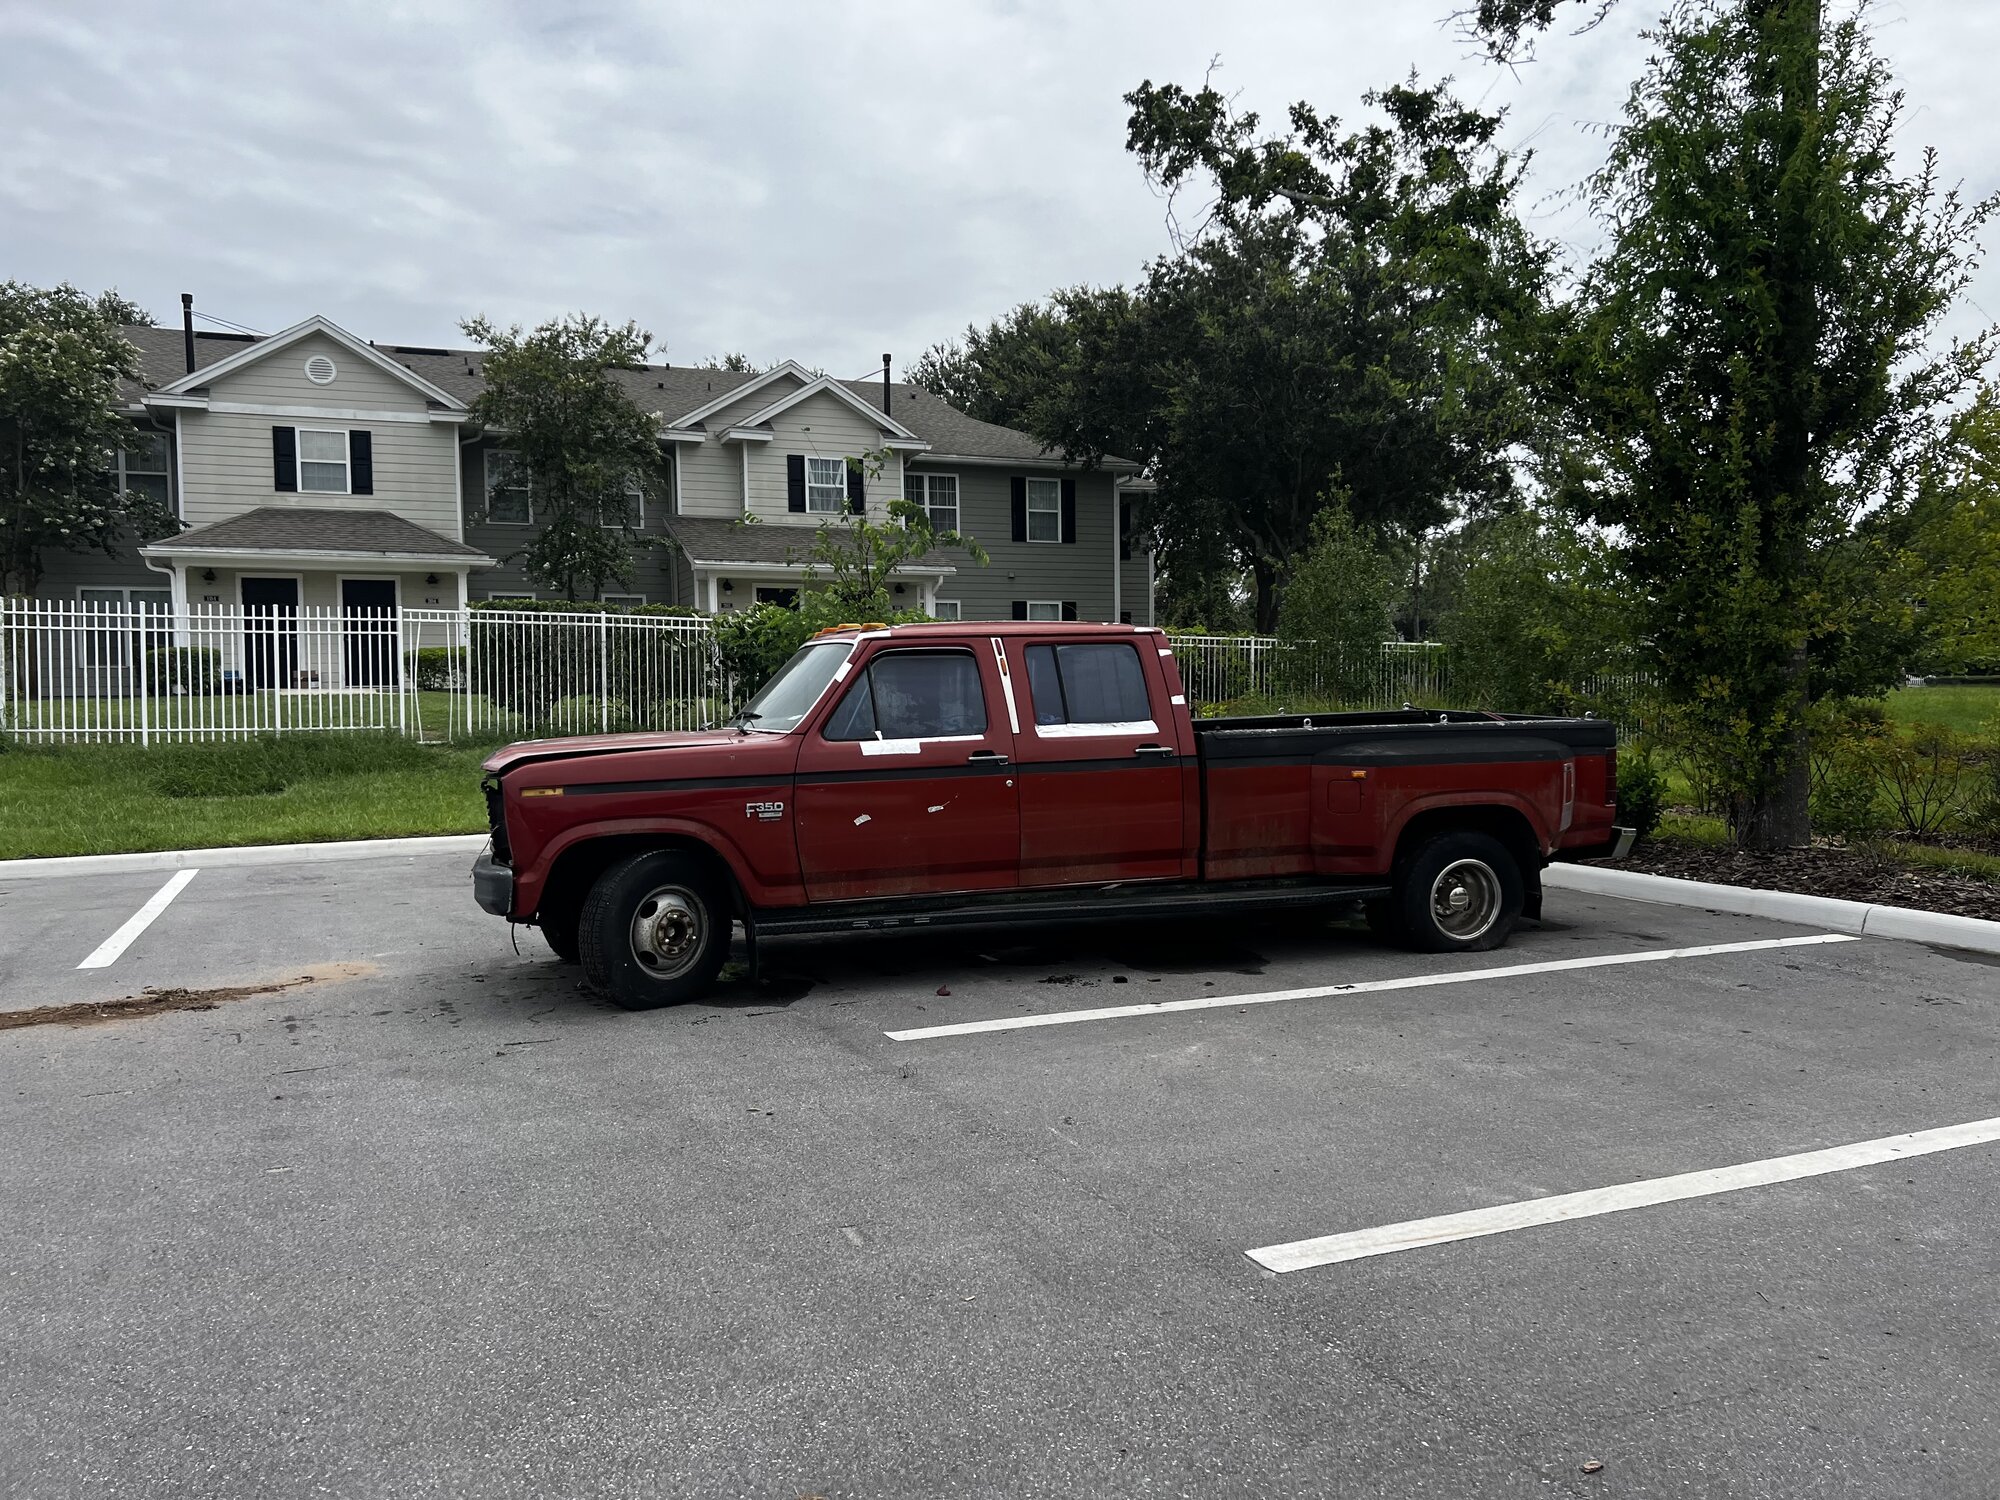 1986 Ford F350 - 1986 f350 Stock -  Ford Truck Profile